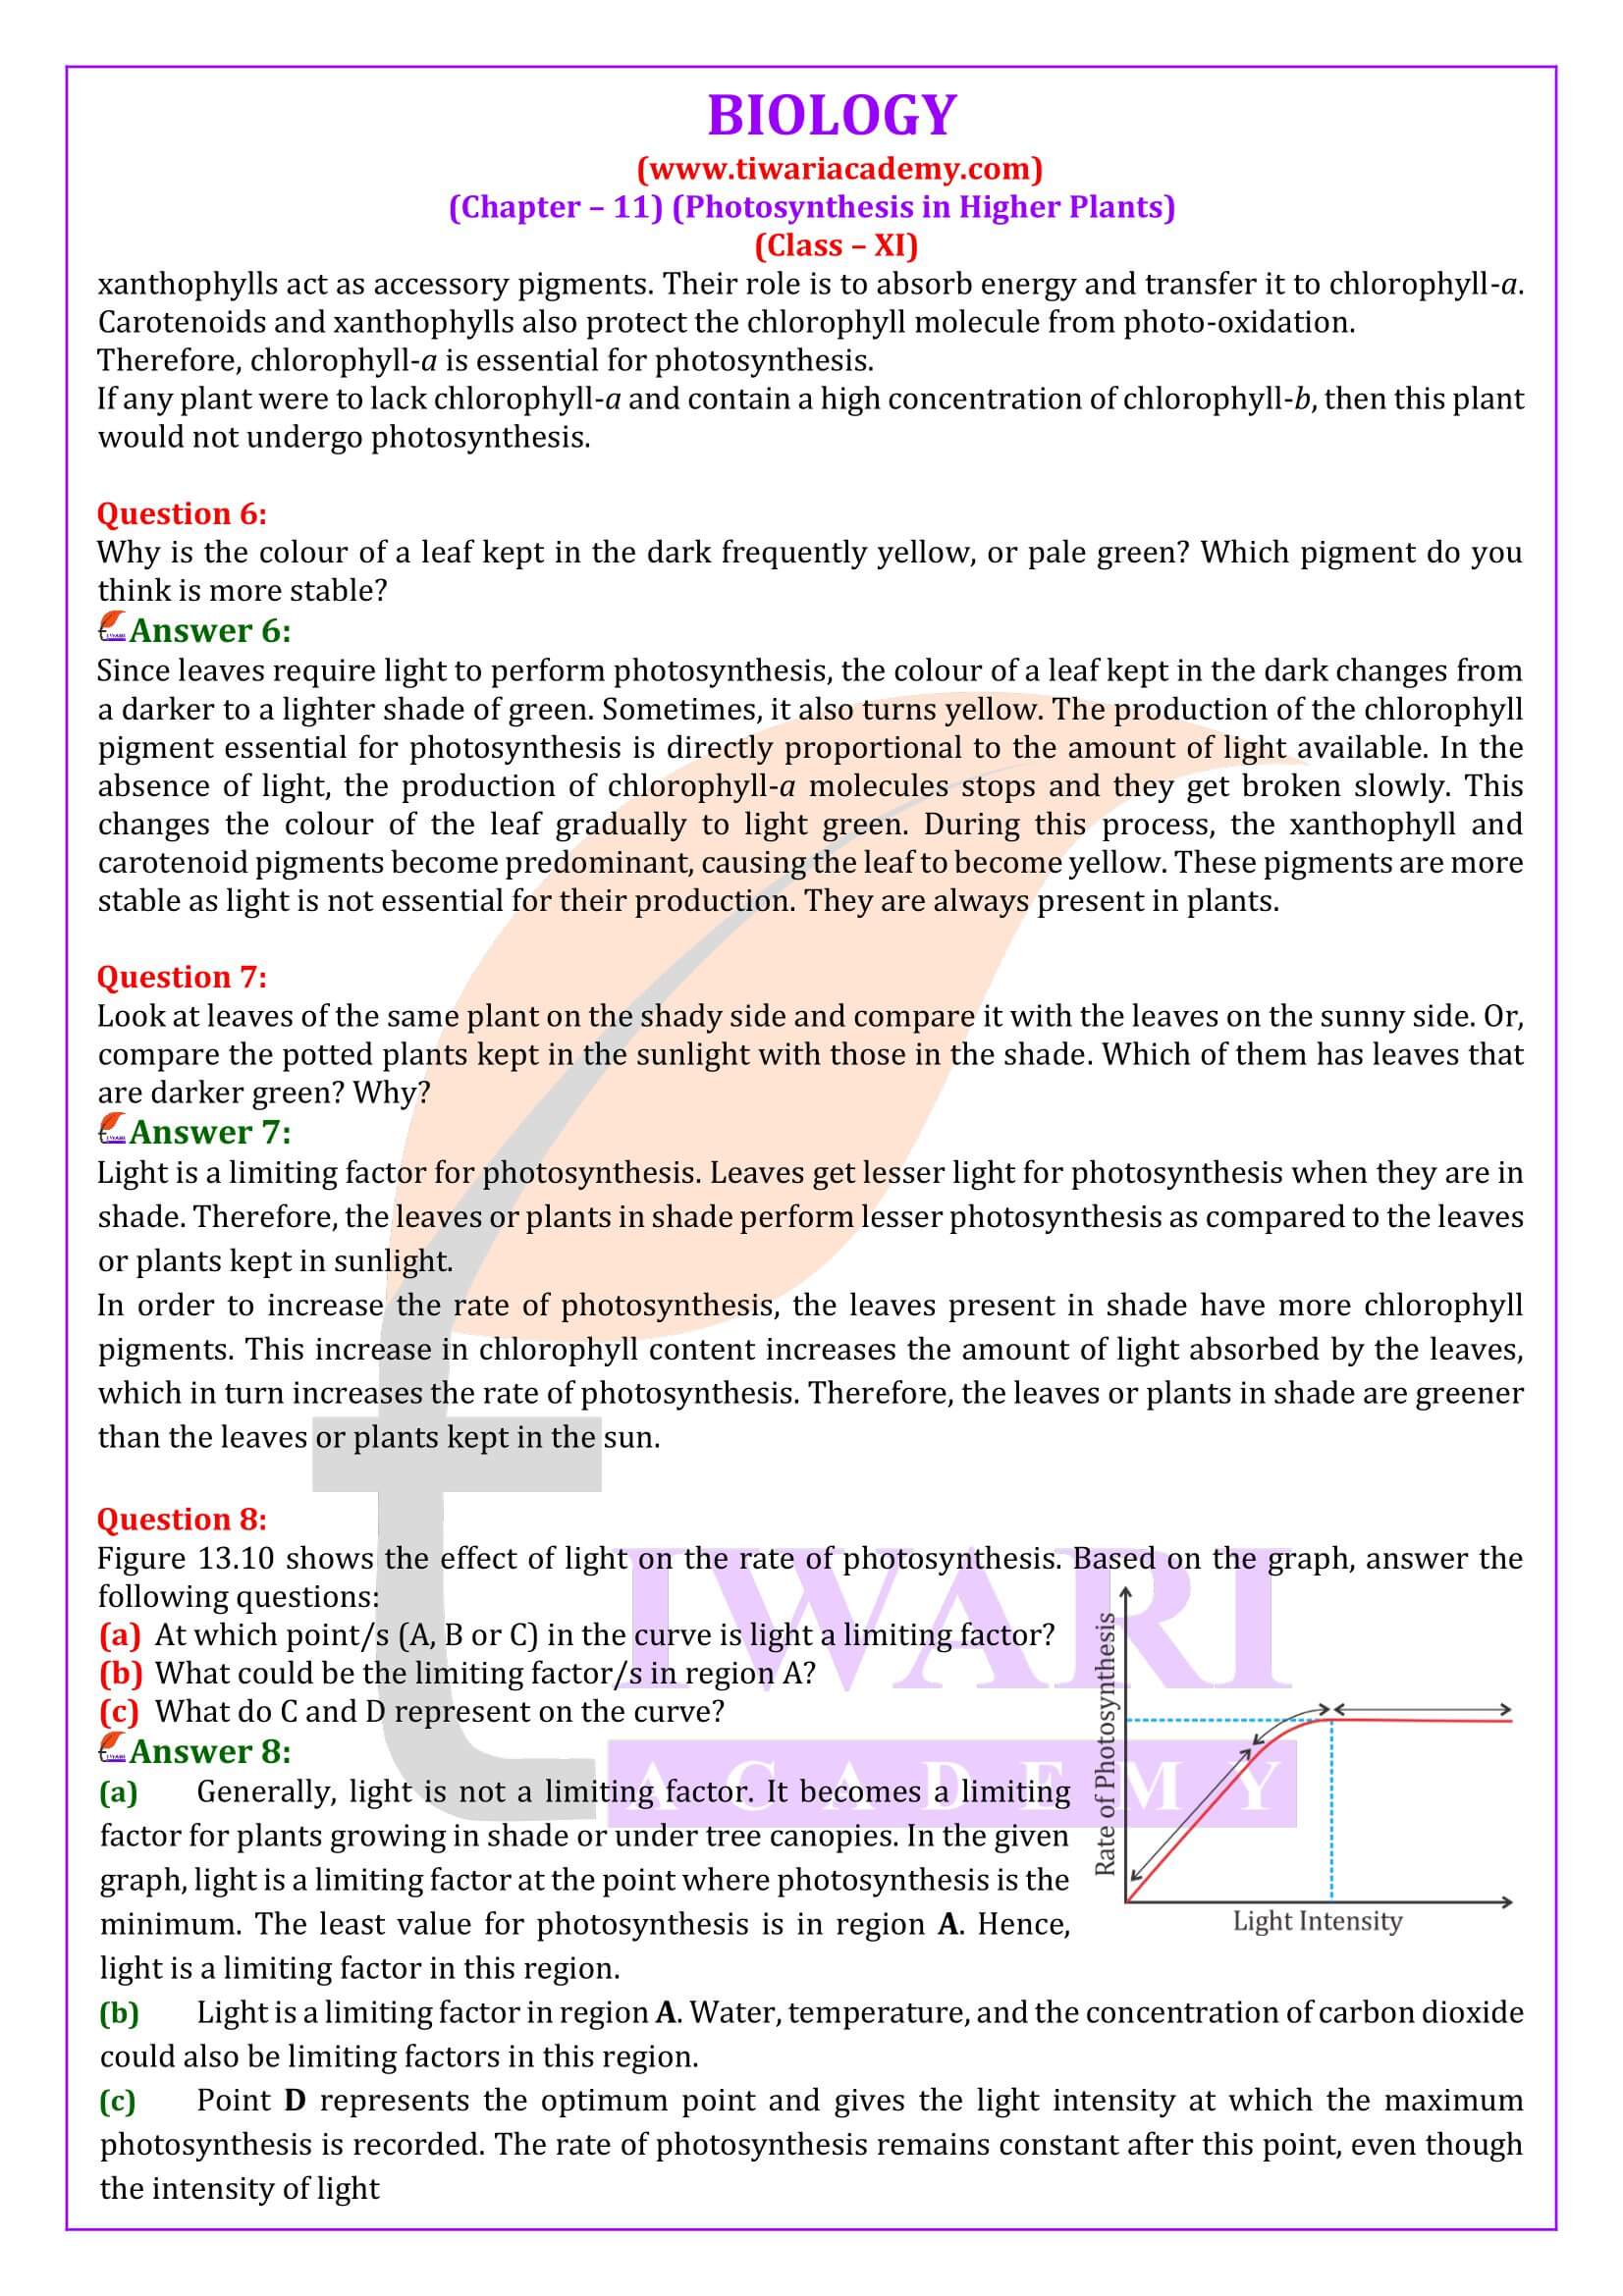 NCERT Solutions for Class 11 Biology Chapter 11 in English Medium